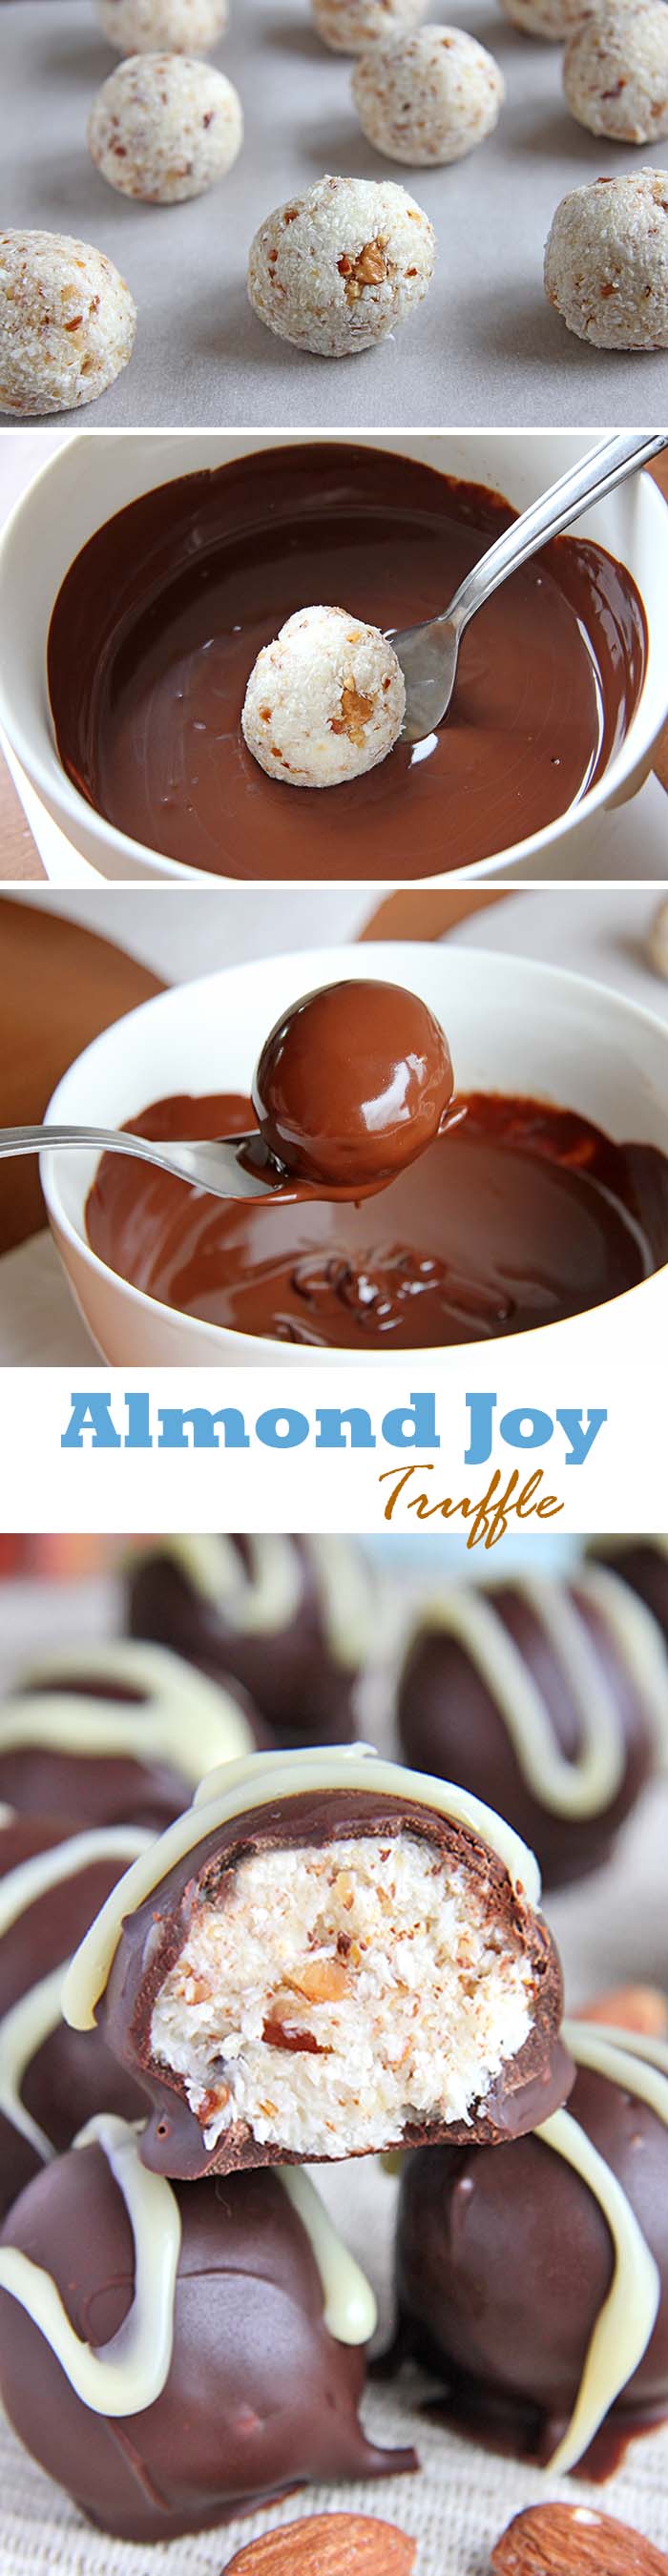 Truffles that tastes just like the Almond Joy candy bar! Your family and friends are sure to love them. #almondjoy #truffle #homemade